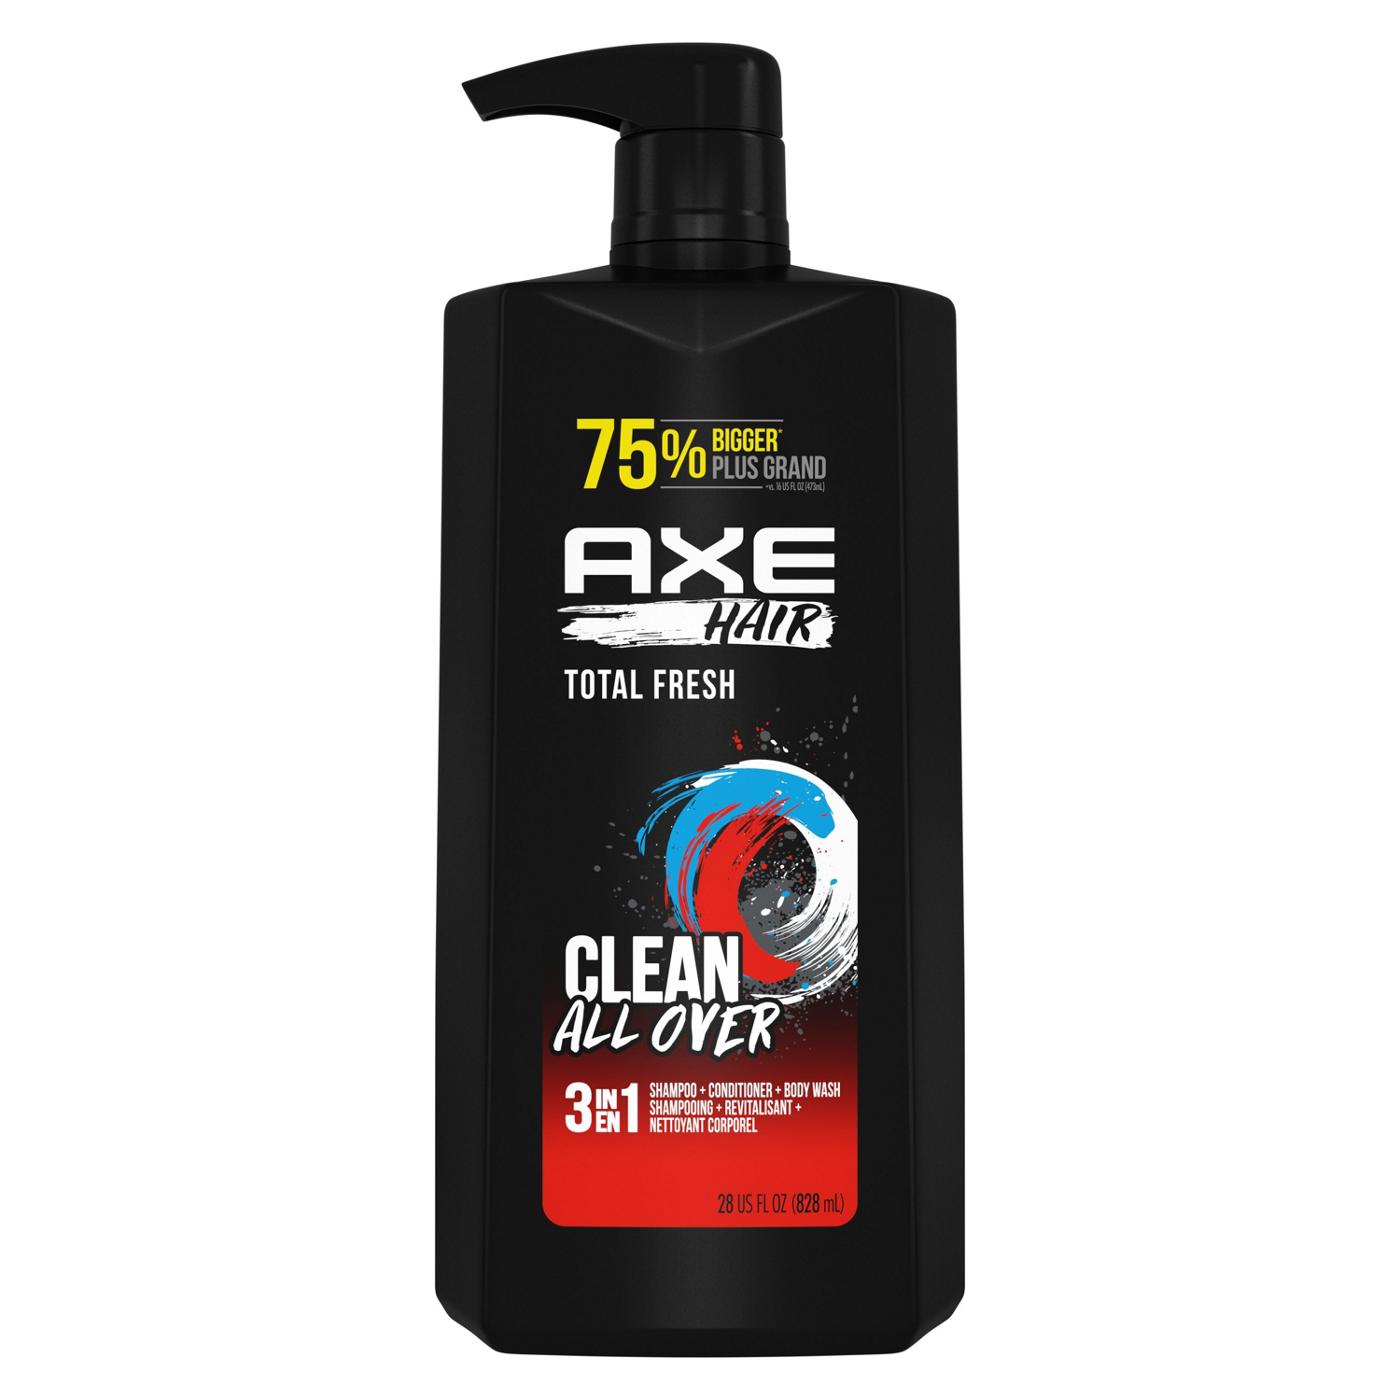 AXE Hair 3 in 1 Shampoo + Conditioner + Body Wash - Total Fresh; image 1 of 6